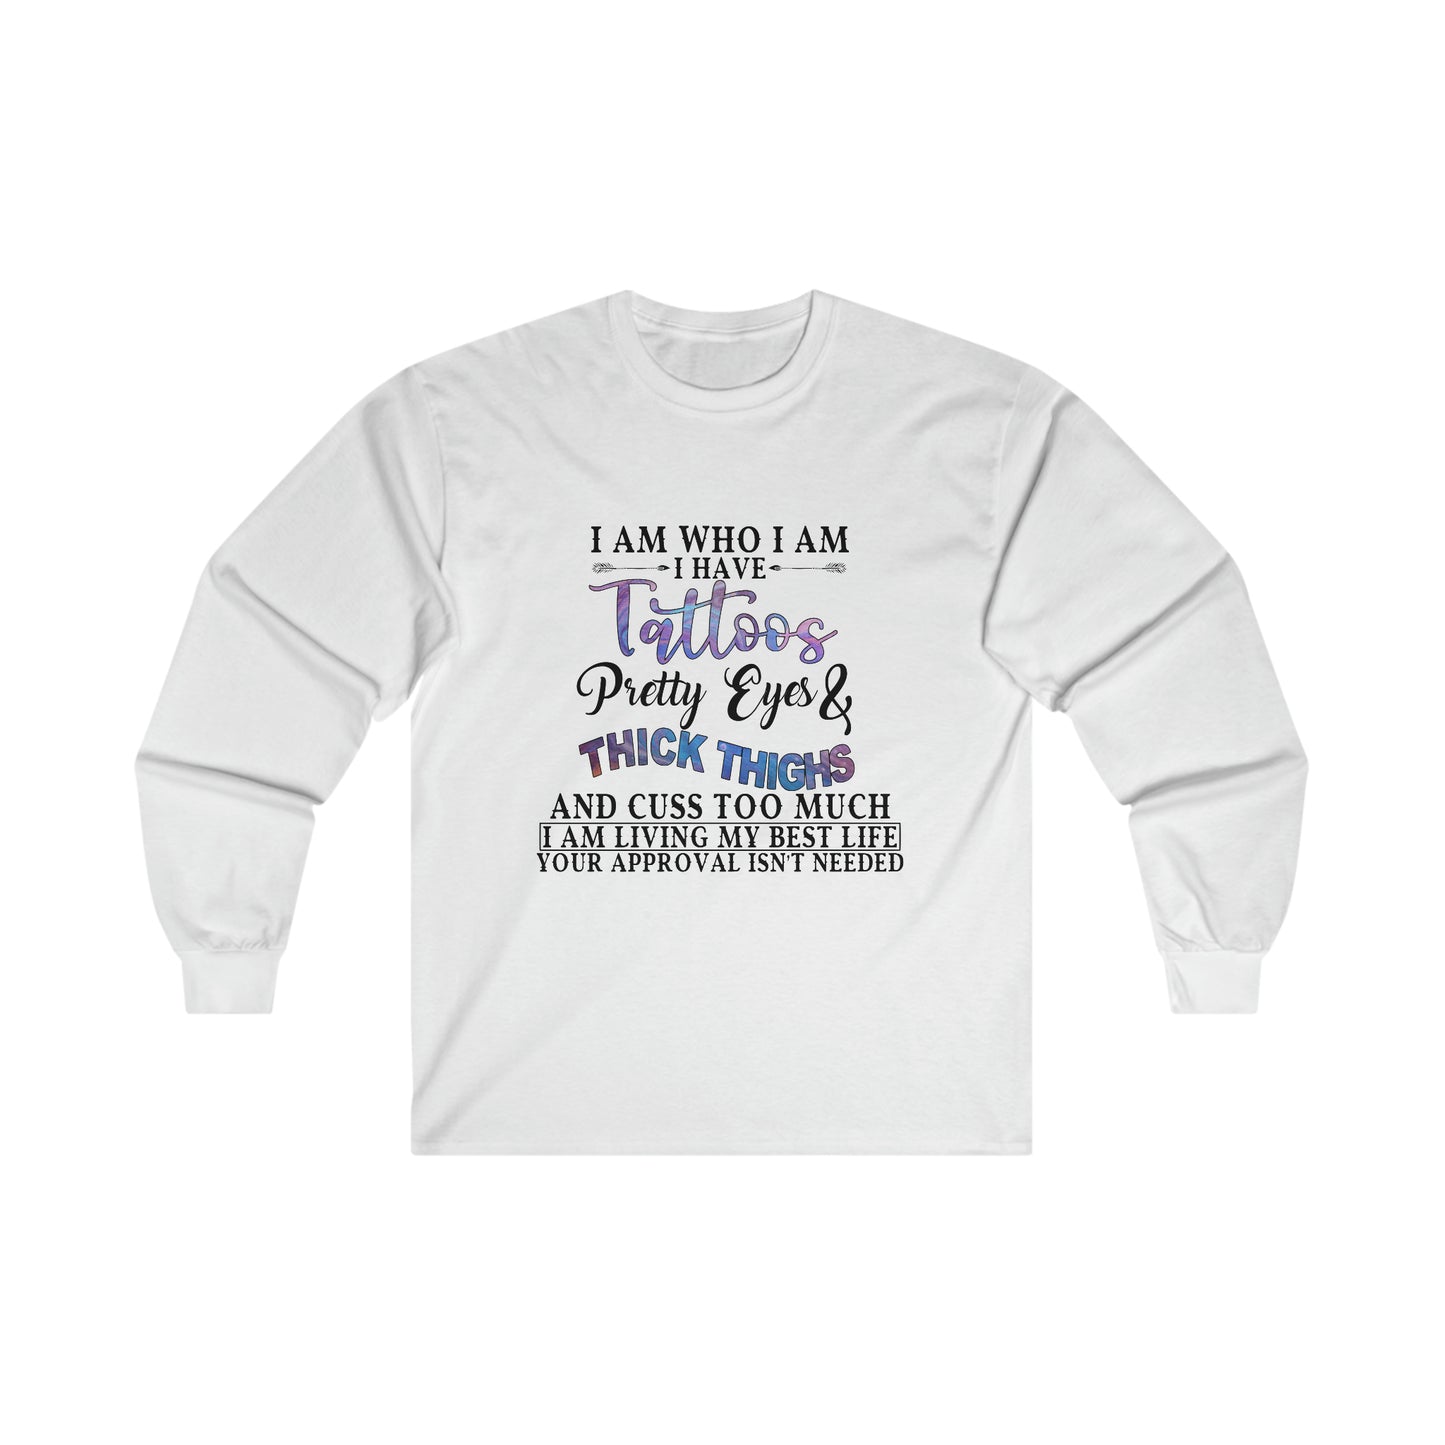 I Am Who I Am, Tattoos, Pretty Eyes, Thick Thighs: Ultra Cotton Long Sleeve Tee